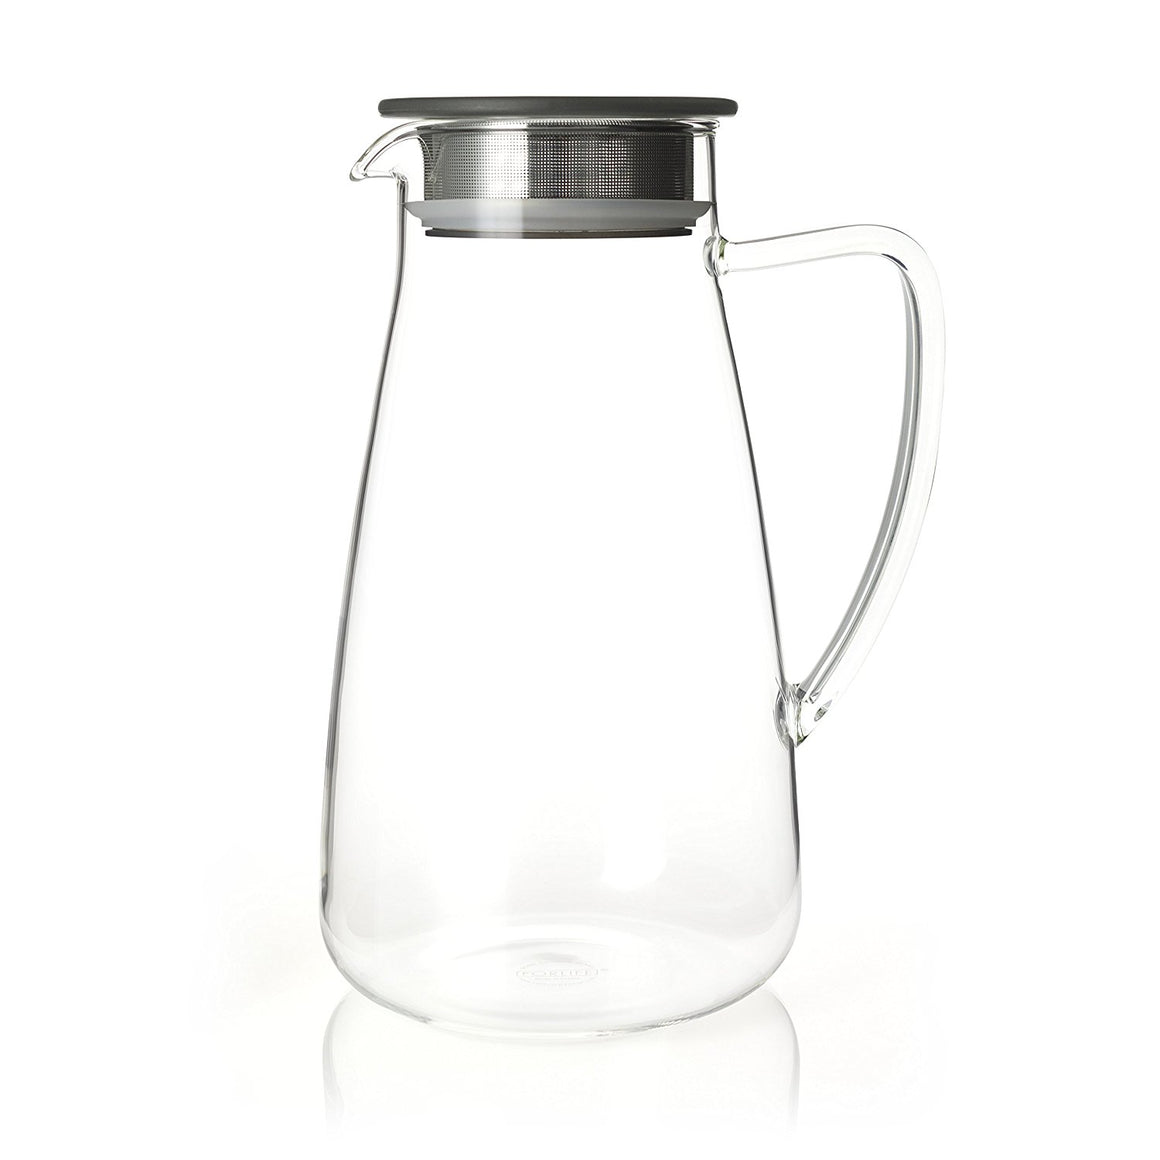 ForLife Flask Iced Tea Pitcher (4 colors)